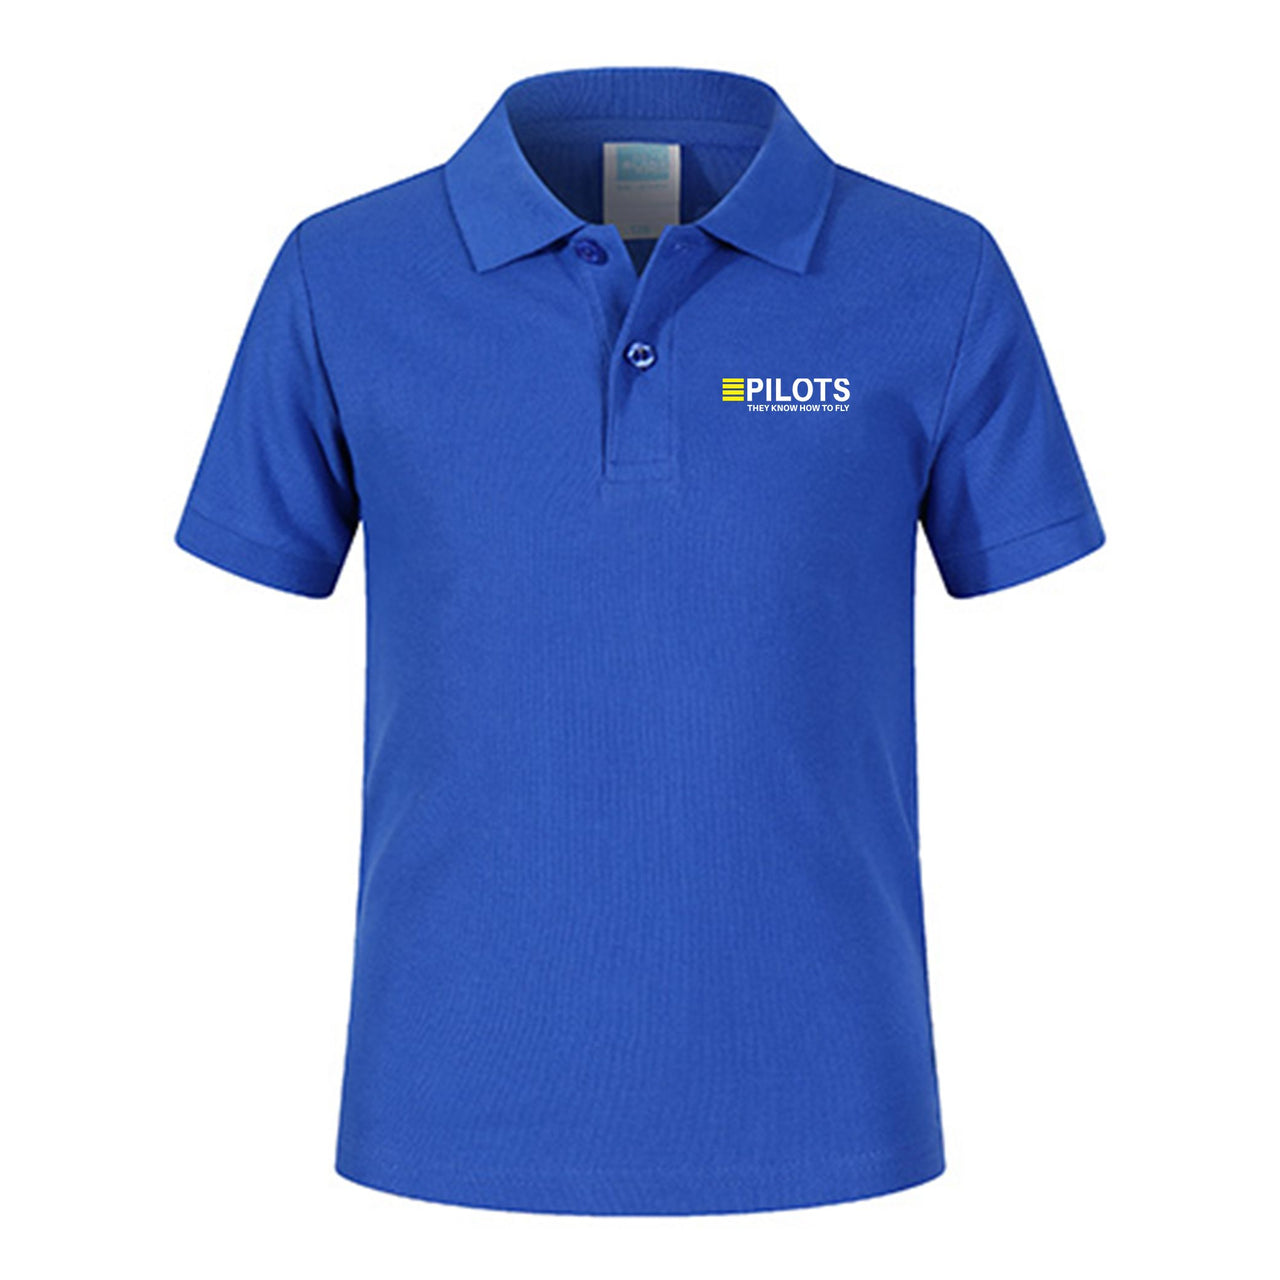 Pilots They Know How To Fly Designed Children Polo T-Shirts